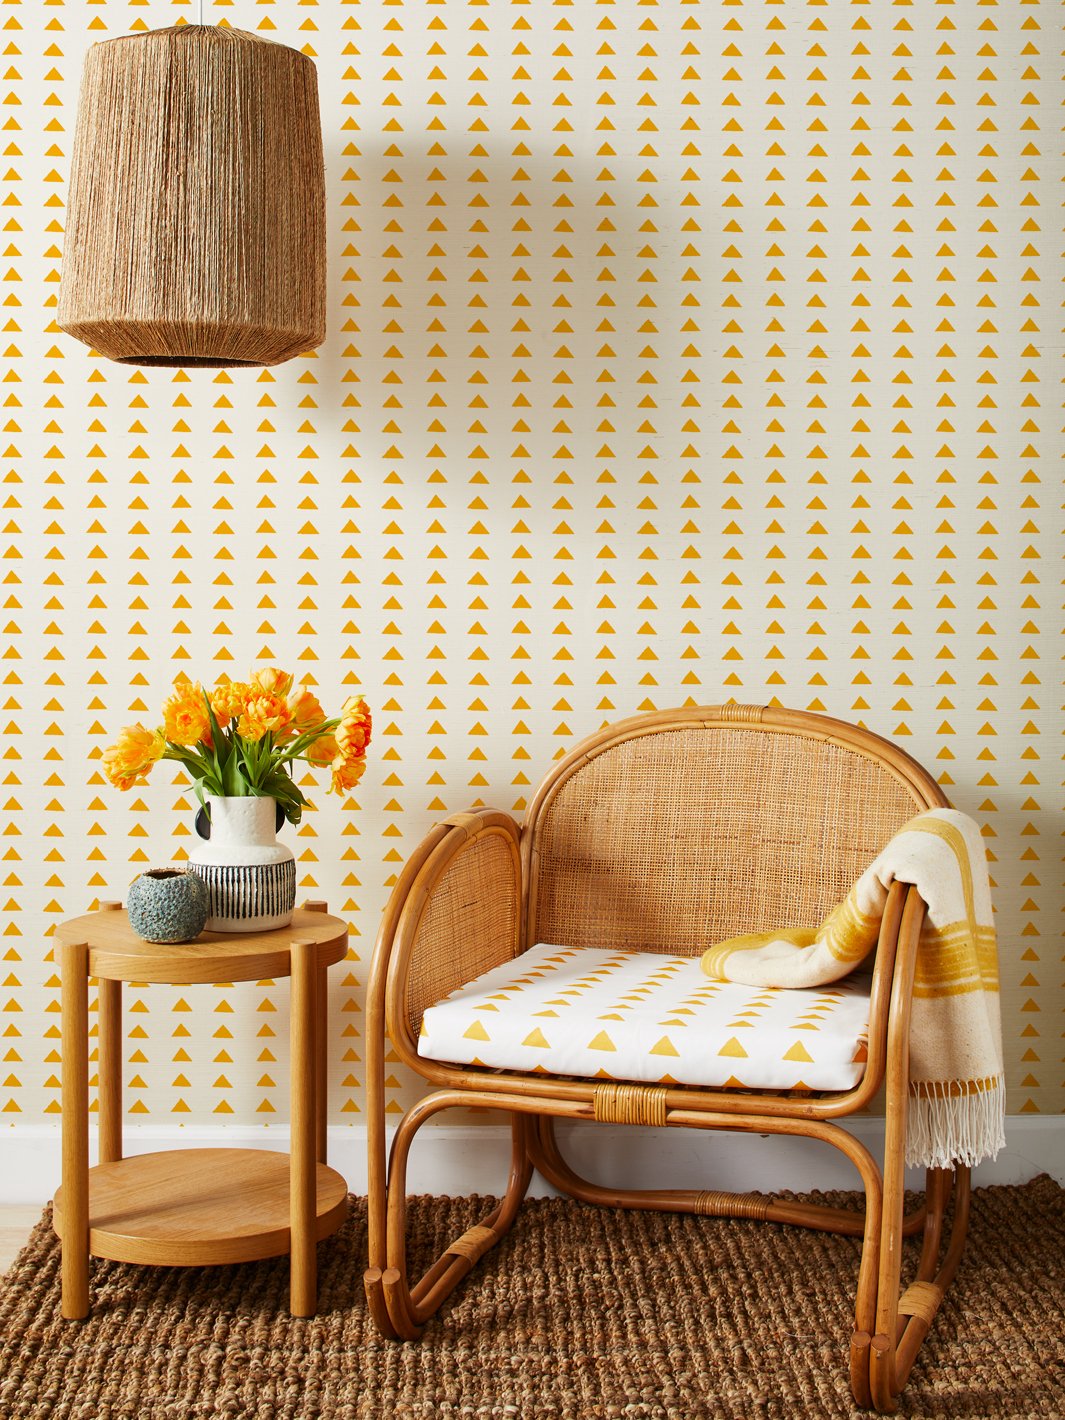 'Triangles' Grasscloth' Wallpaper by Nathan Turner - Gold